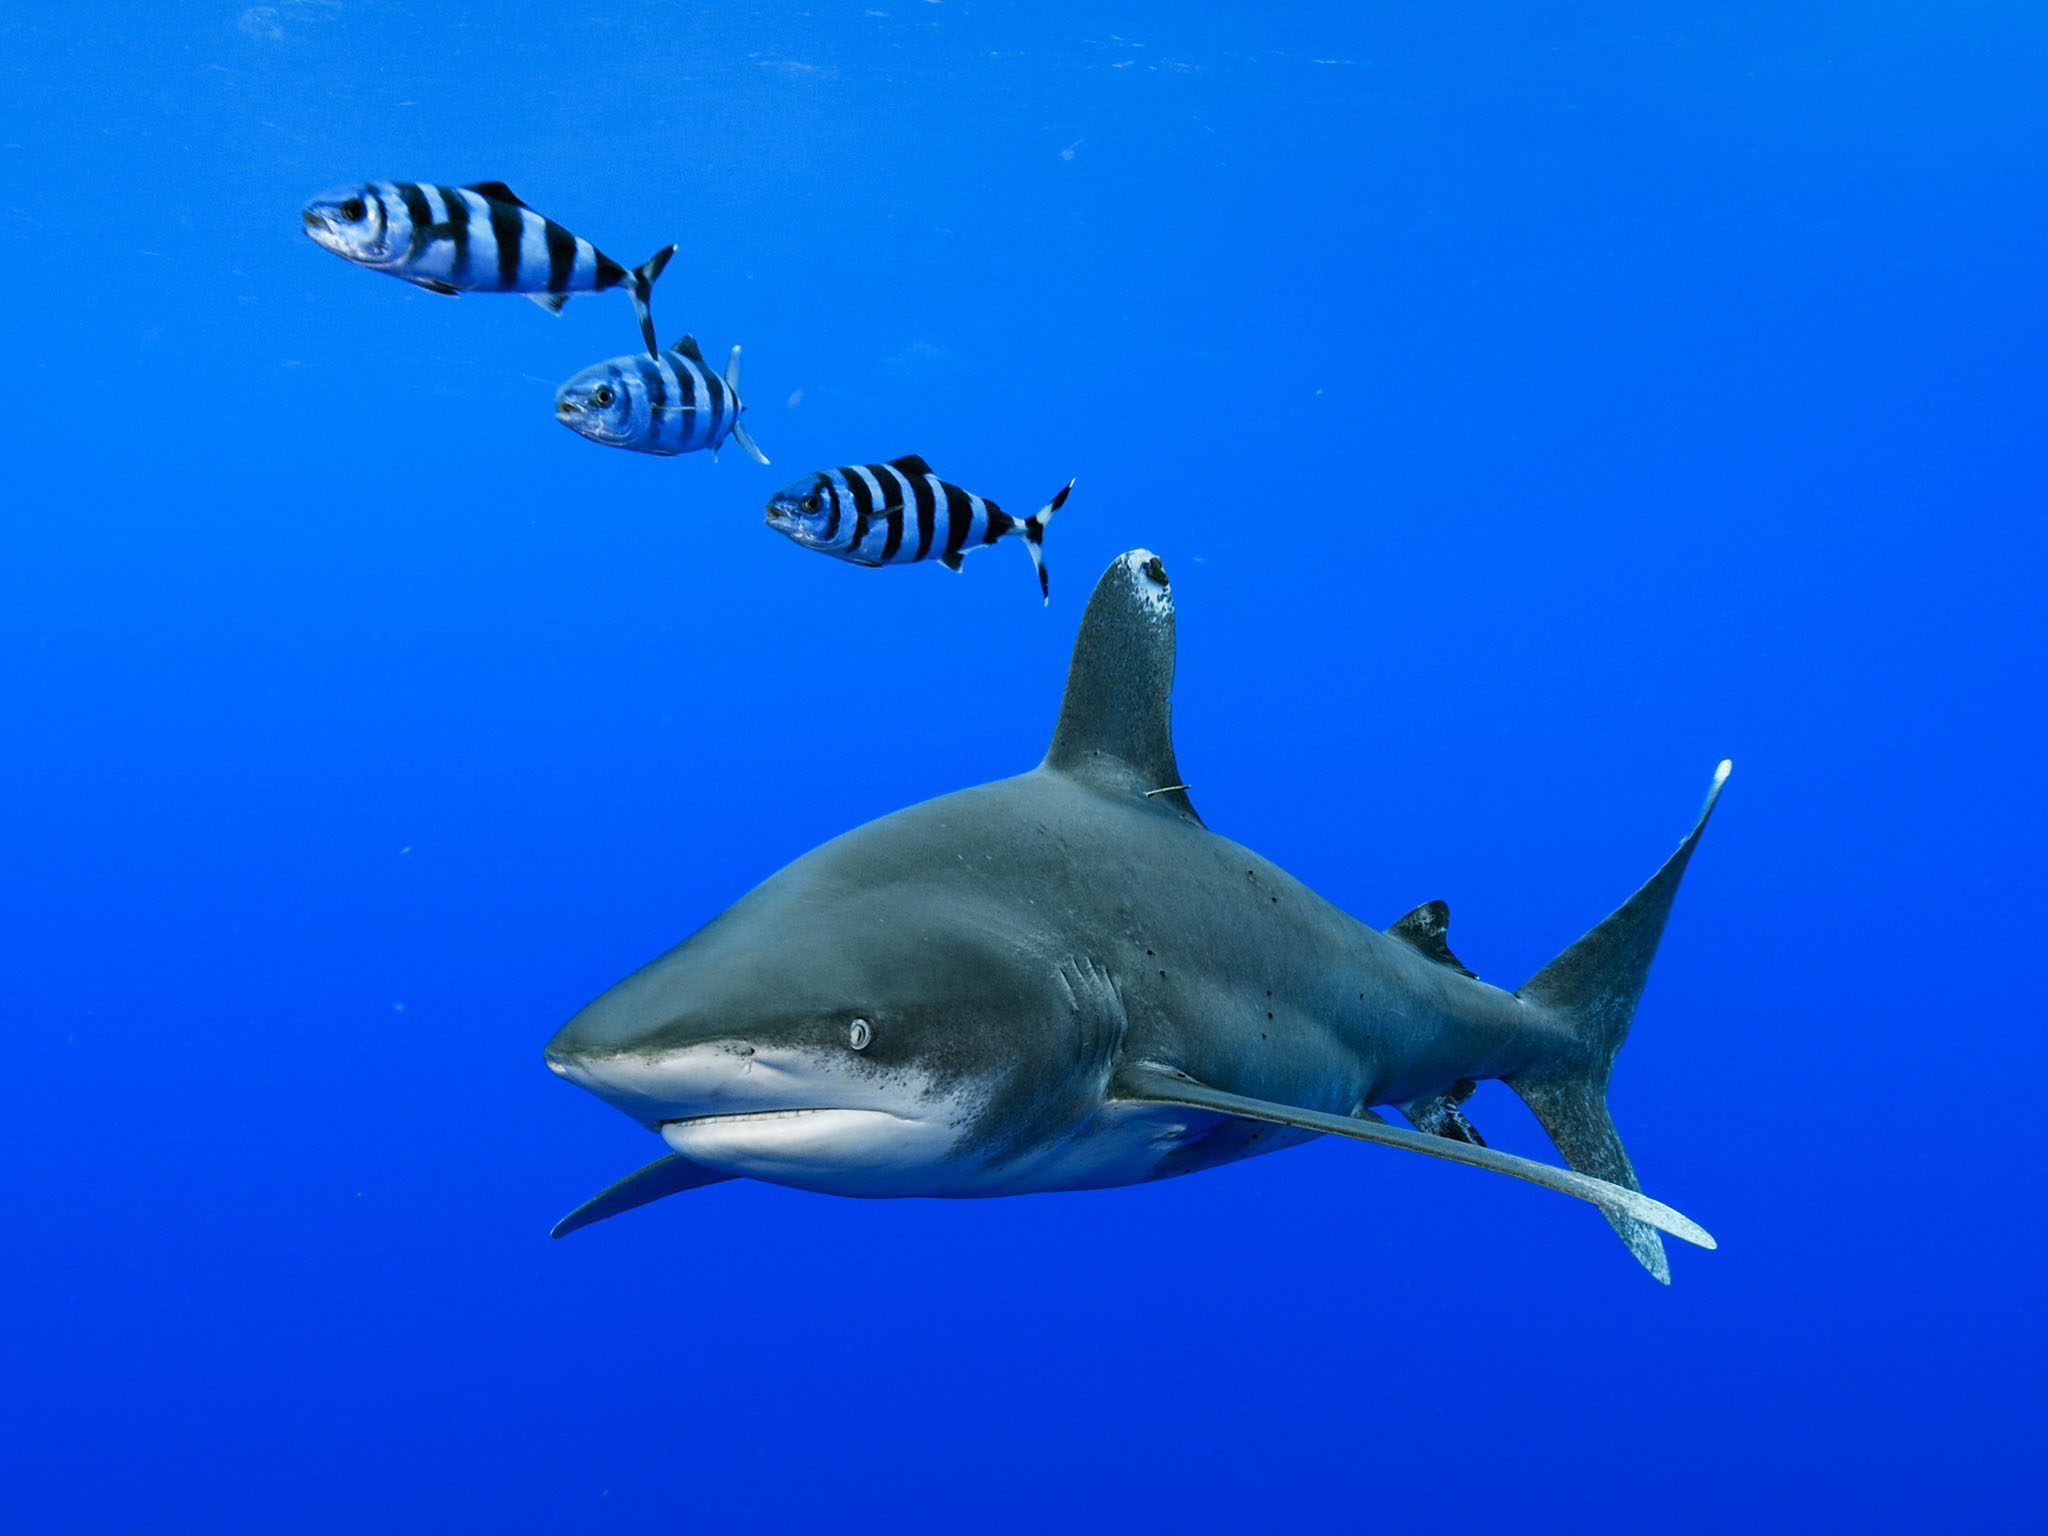 Oceanic Whitetip Shark In The Waters Off Cat Island - Sharks Bahamas National Geographic - HD Wallpaper 